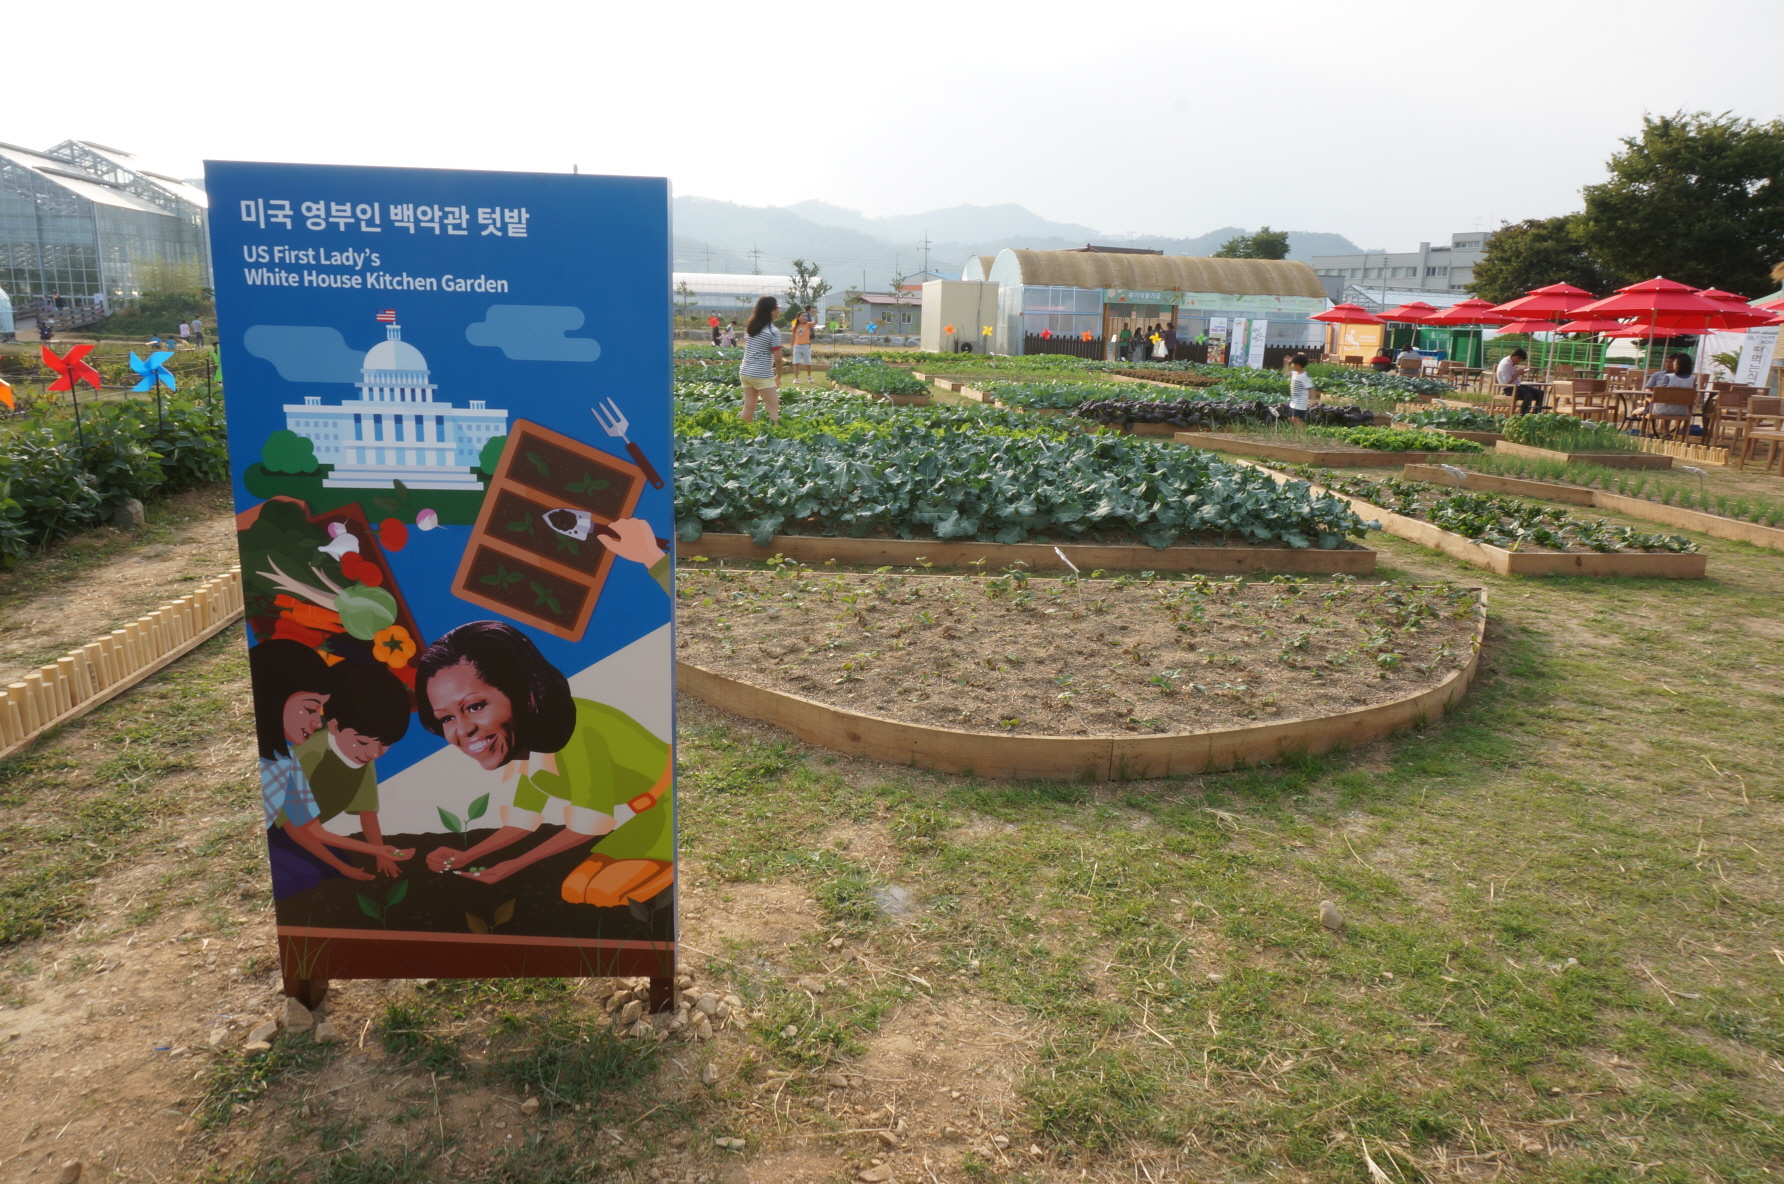 The 'US First Lady's White House Kitchen Garden' exhibited at the Goesan International Organic Expo was the perfect example of beauty in simplicity. (Image : Goesan International Organic Expo Homepage)